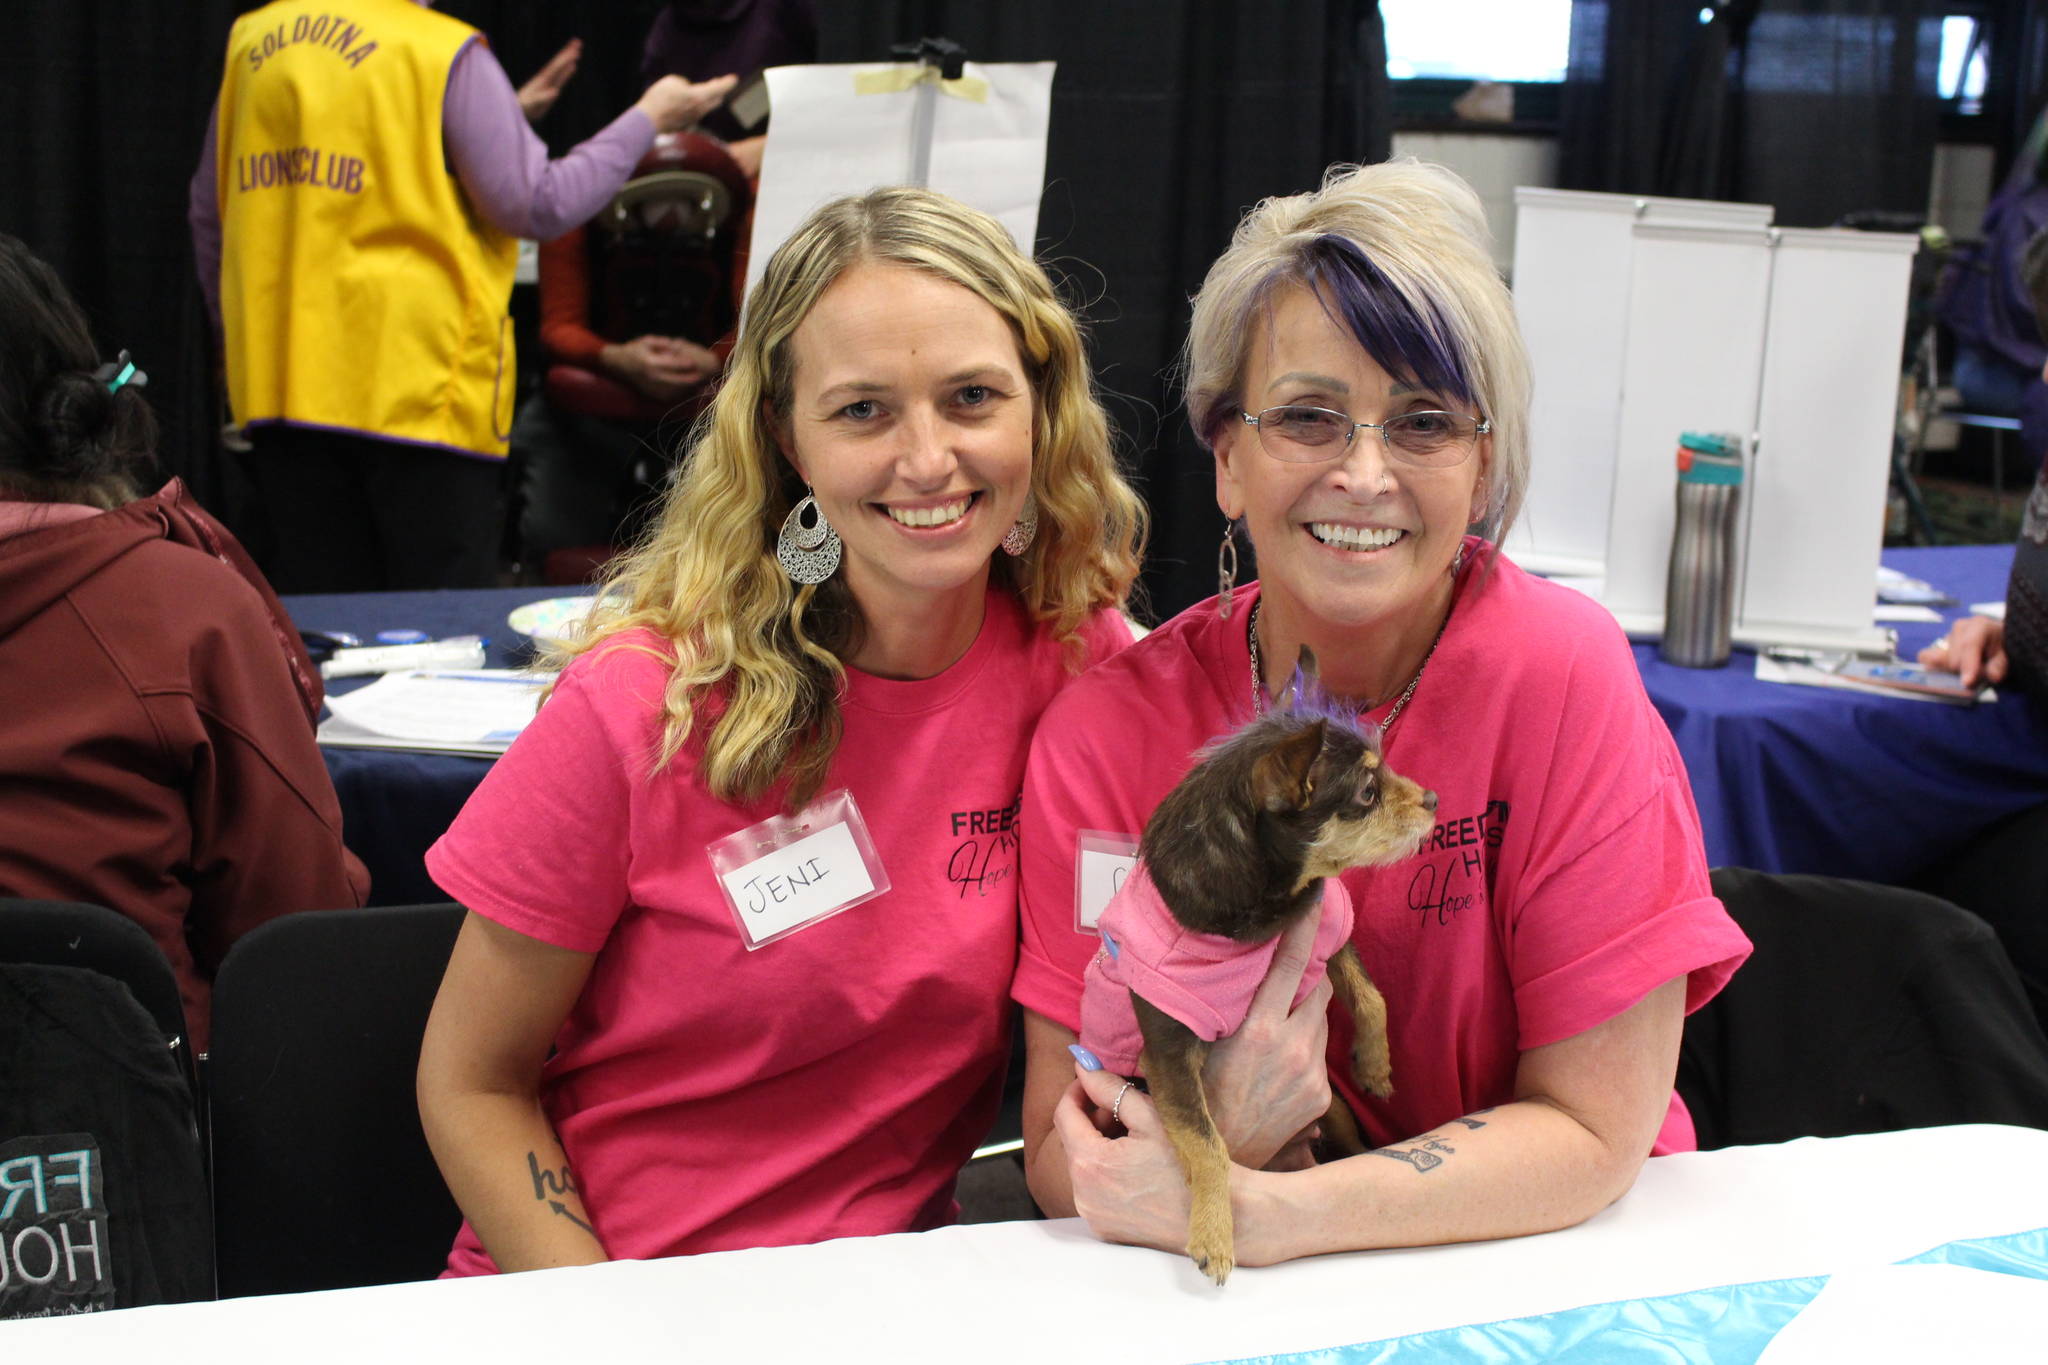 Jennifer Waller, left, Gail Kennedy, right, and Meiko the therapy dog from Freedom House attend the 2020 Project Homeless Connect event at the Soldotna Regional Sports Complex in Soldotna, Alaska, on Jan. 29, 2020. (Photo by Brian Mazurek/Peninsula Clarion)